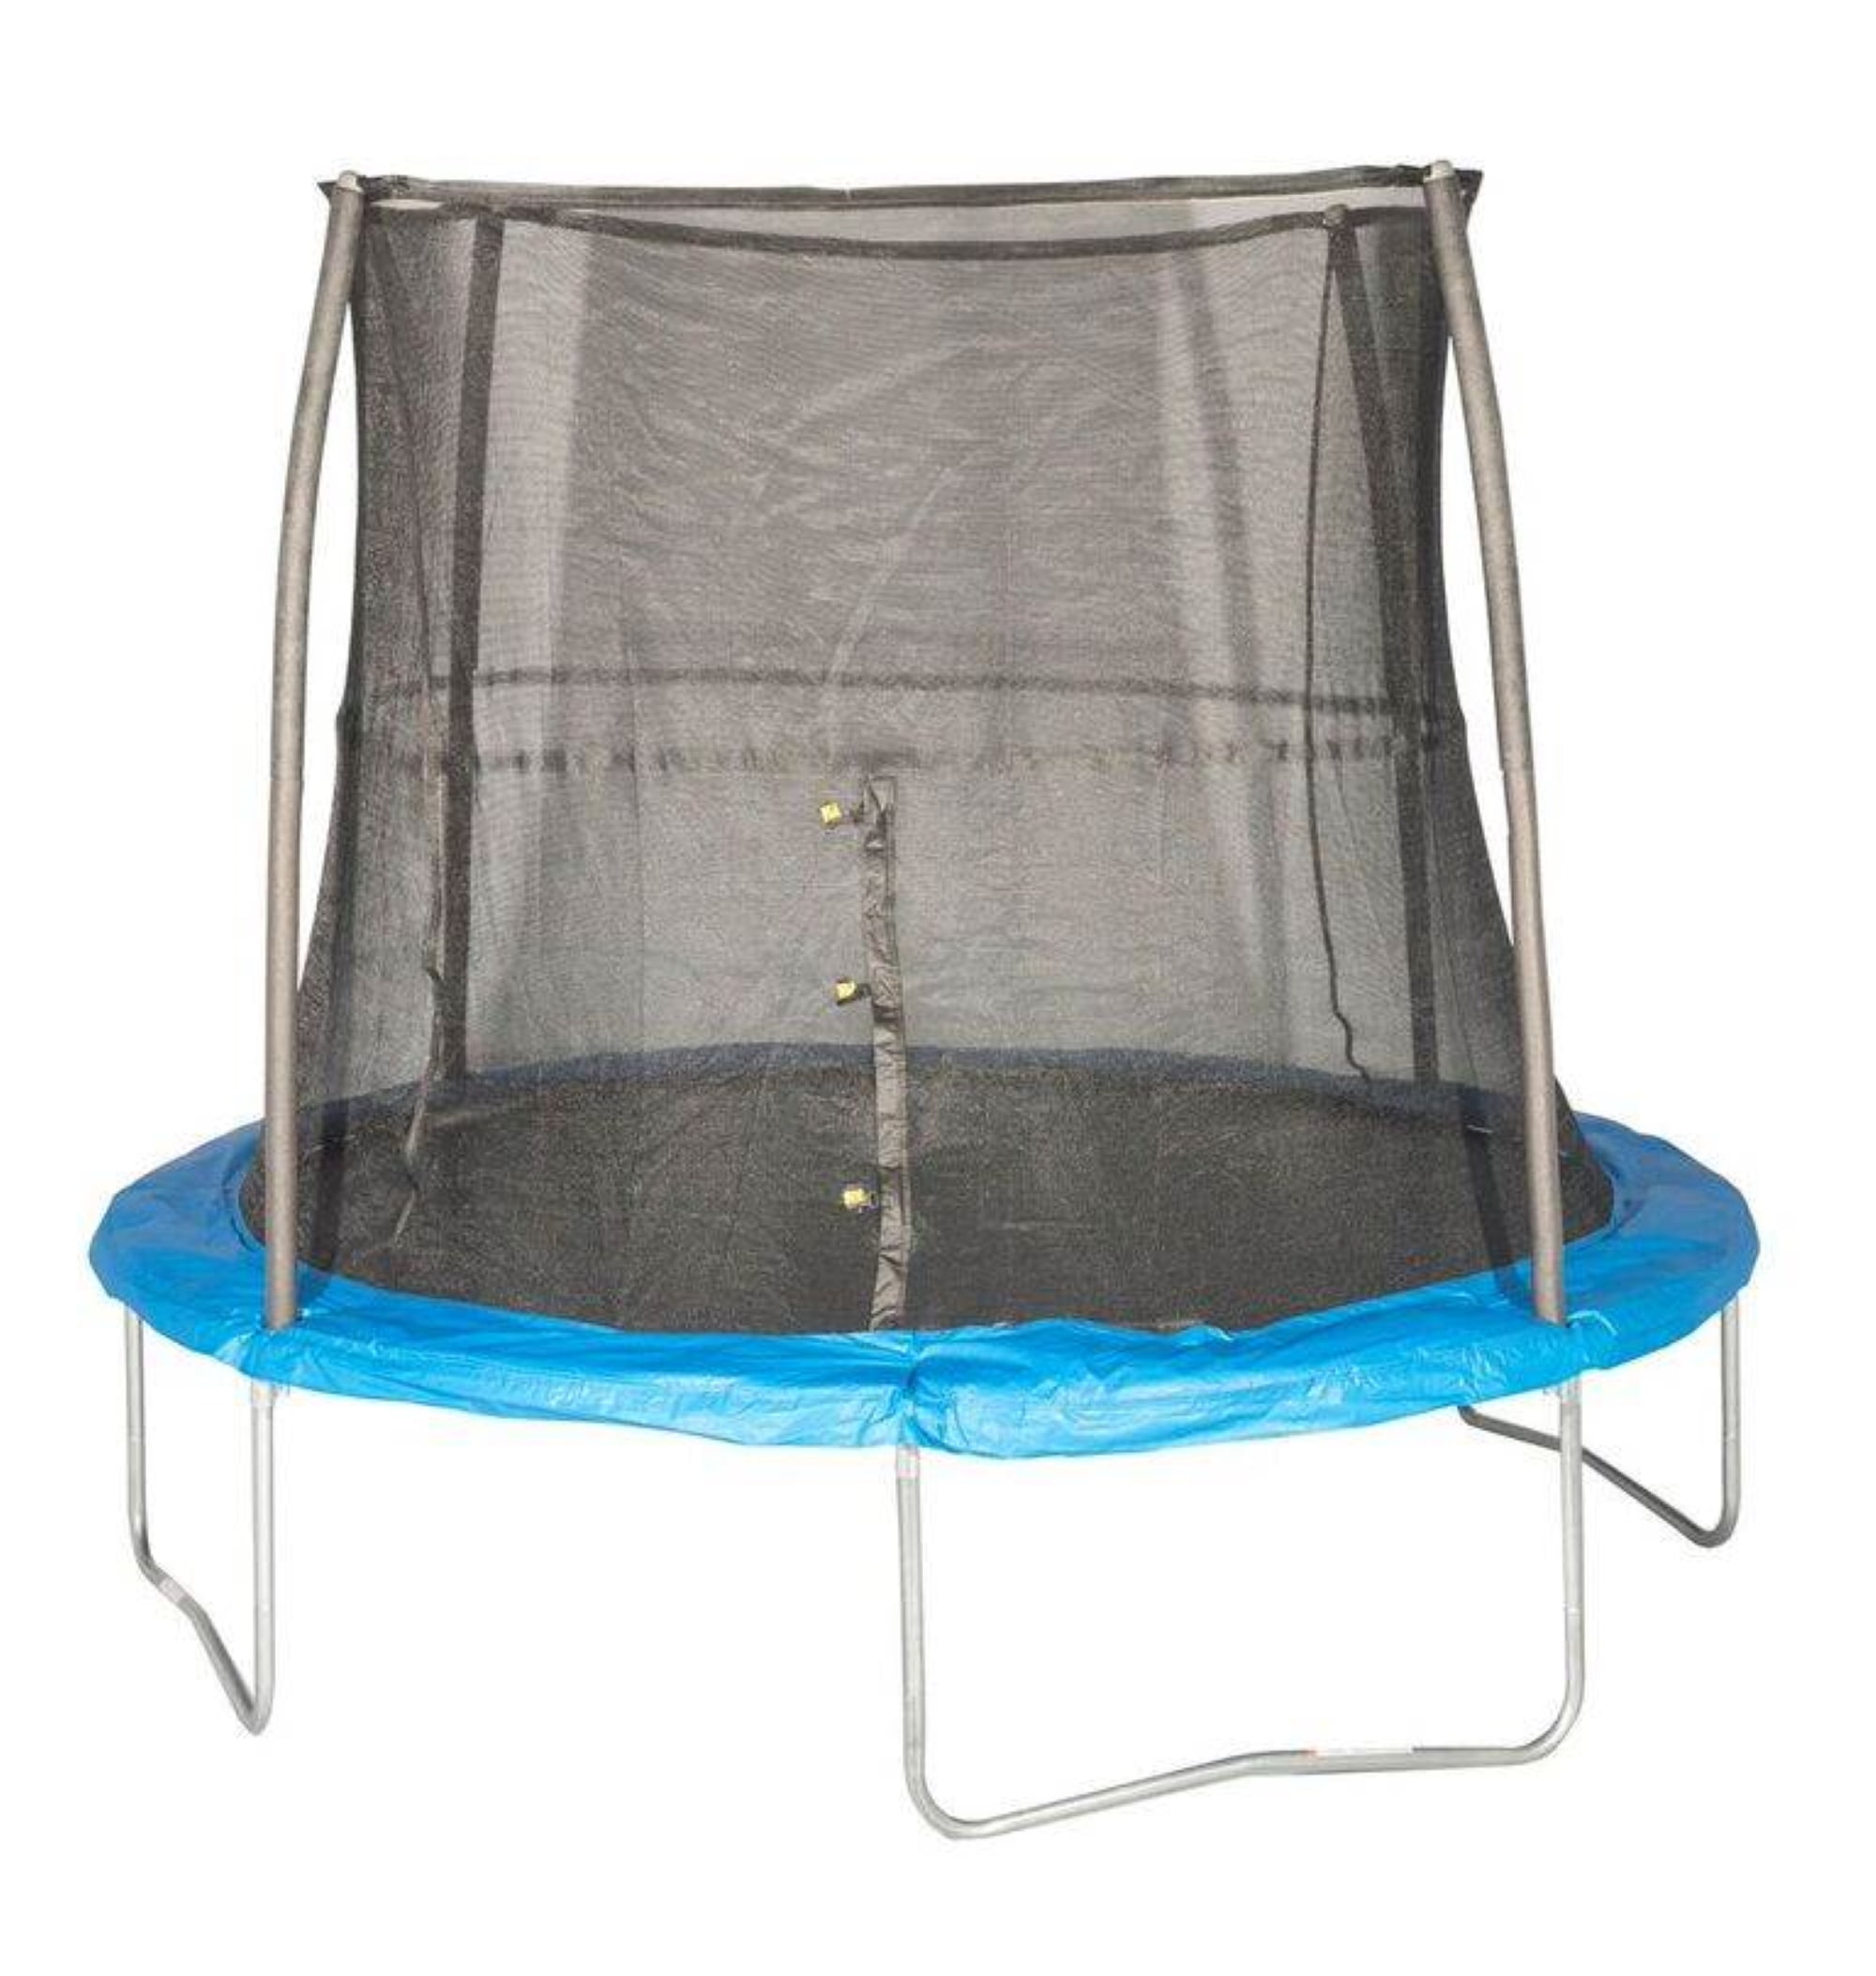 Airzone WM00408 8 Blue Trampoline Combo With Enclosure and Amp PVC Frame Cover for sale online 